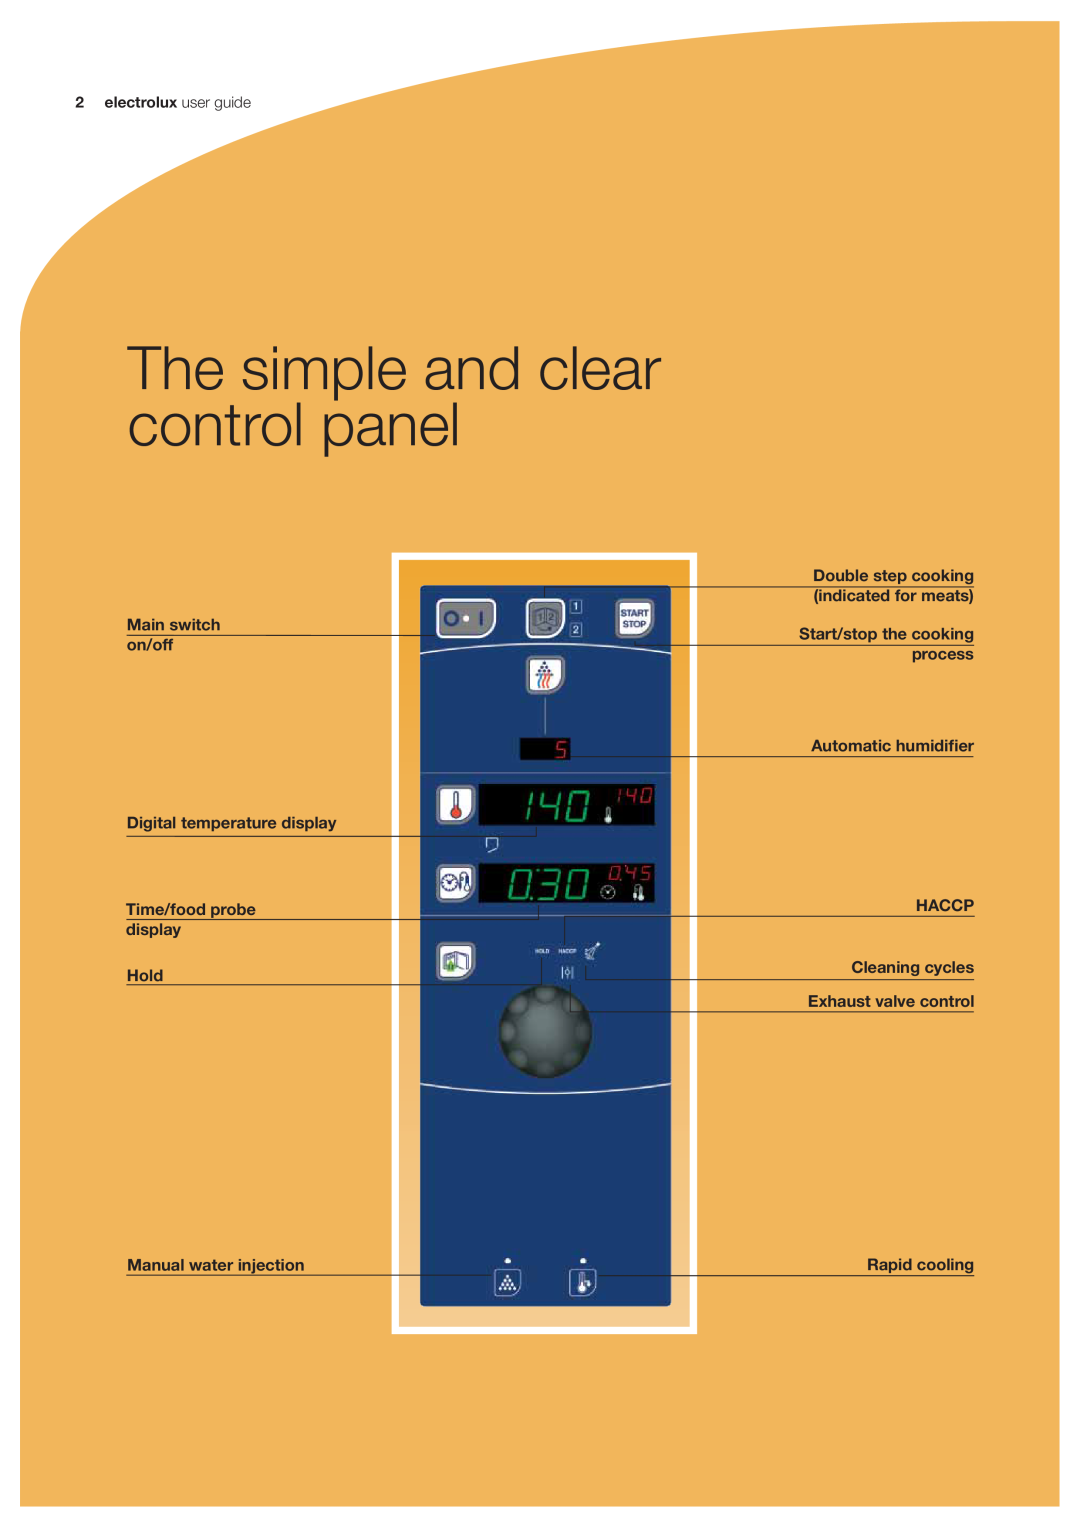 Electrolux GN 1/1 manual The simple and clear control panel, Main switch on/off Digital temperature display, Rapid cooling 